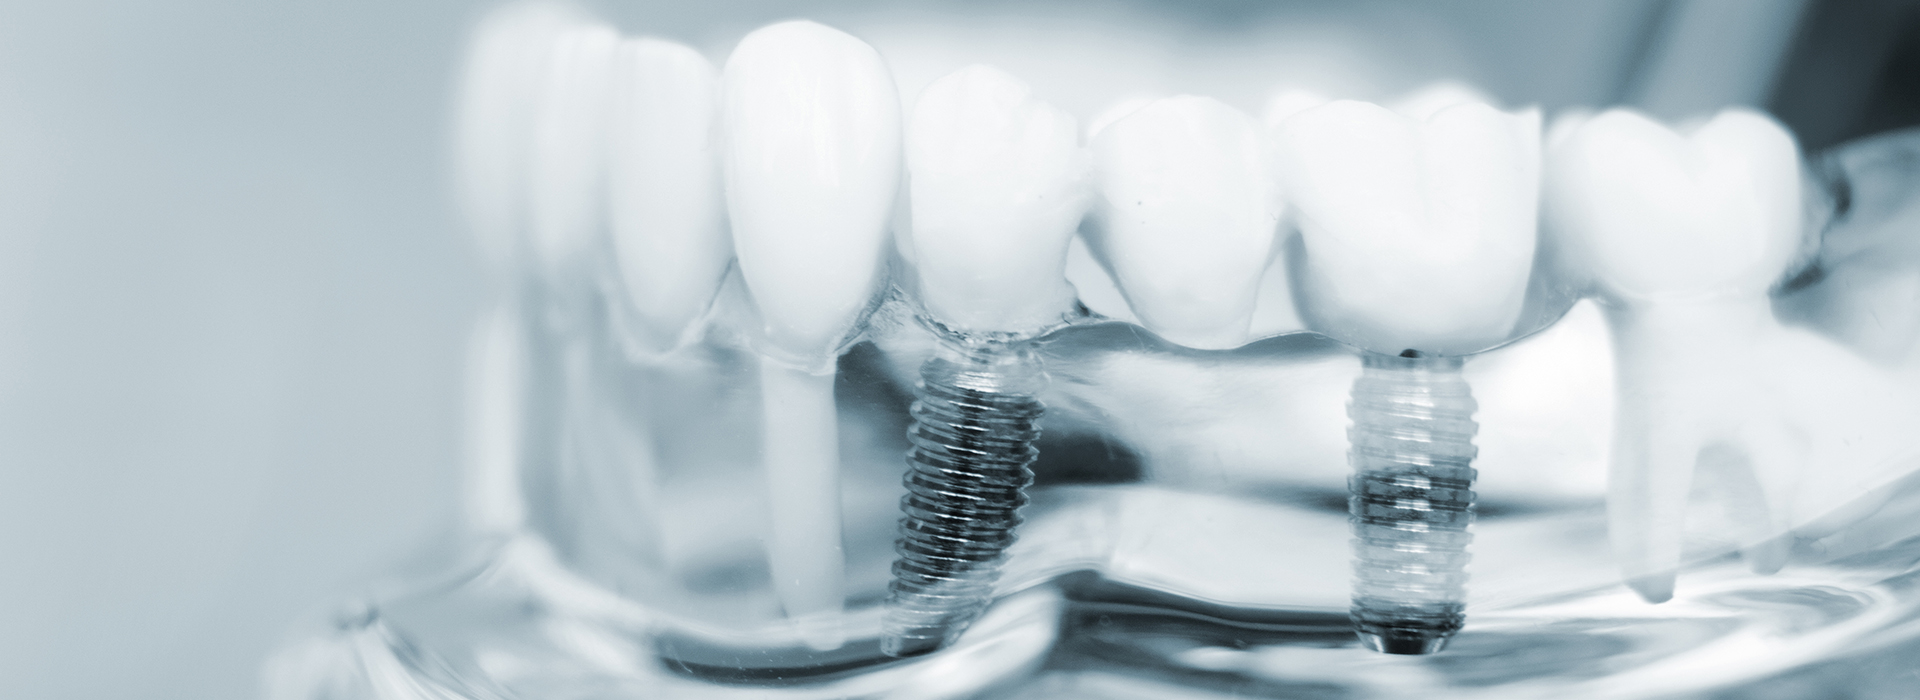 Gregory J. Schmitt, DMD | Snoring Appliances, Root Canals and Crowns  amp  Caps